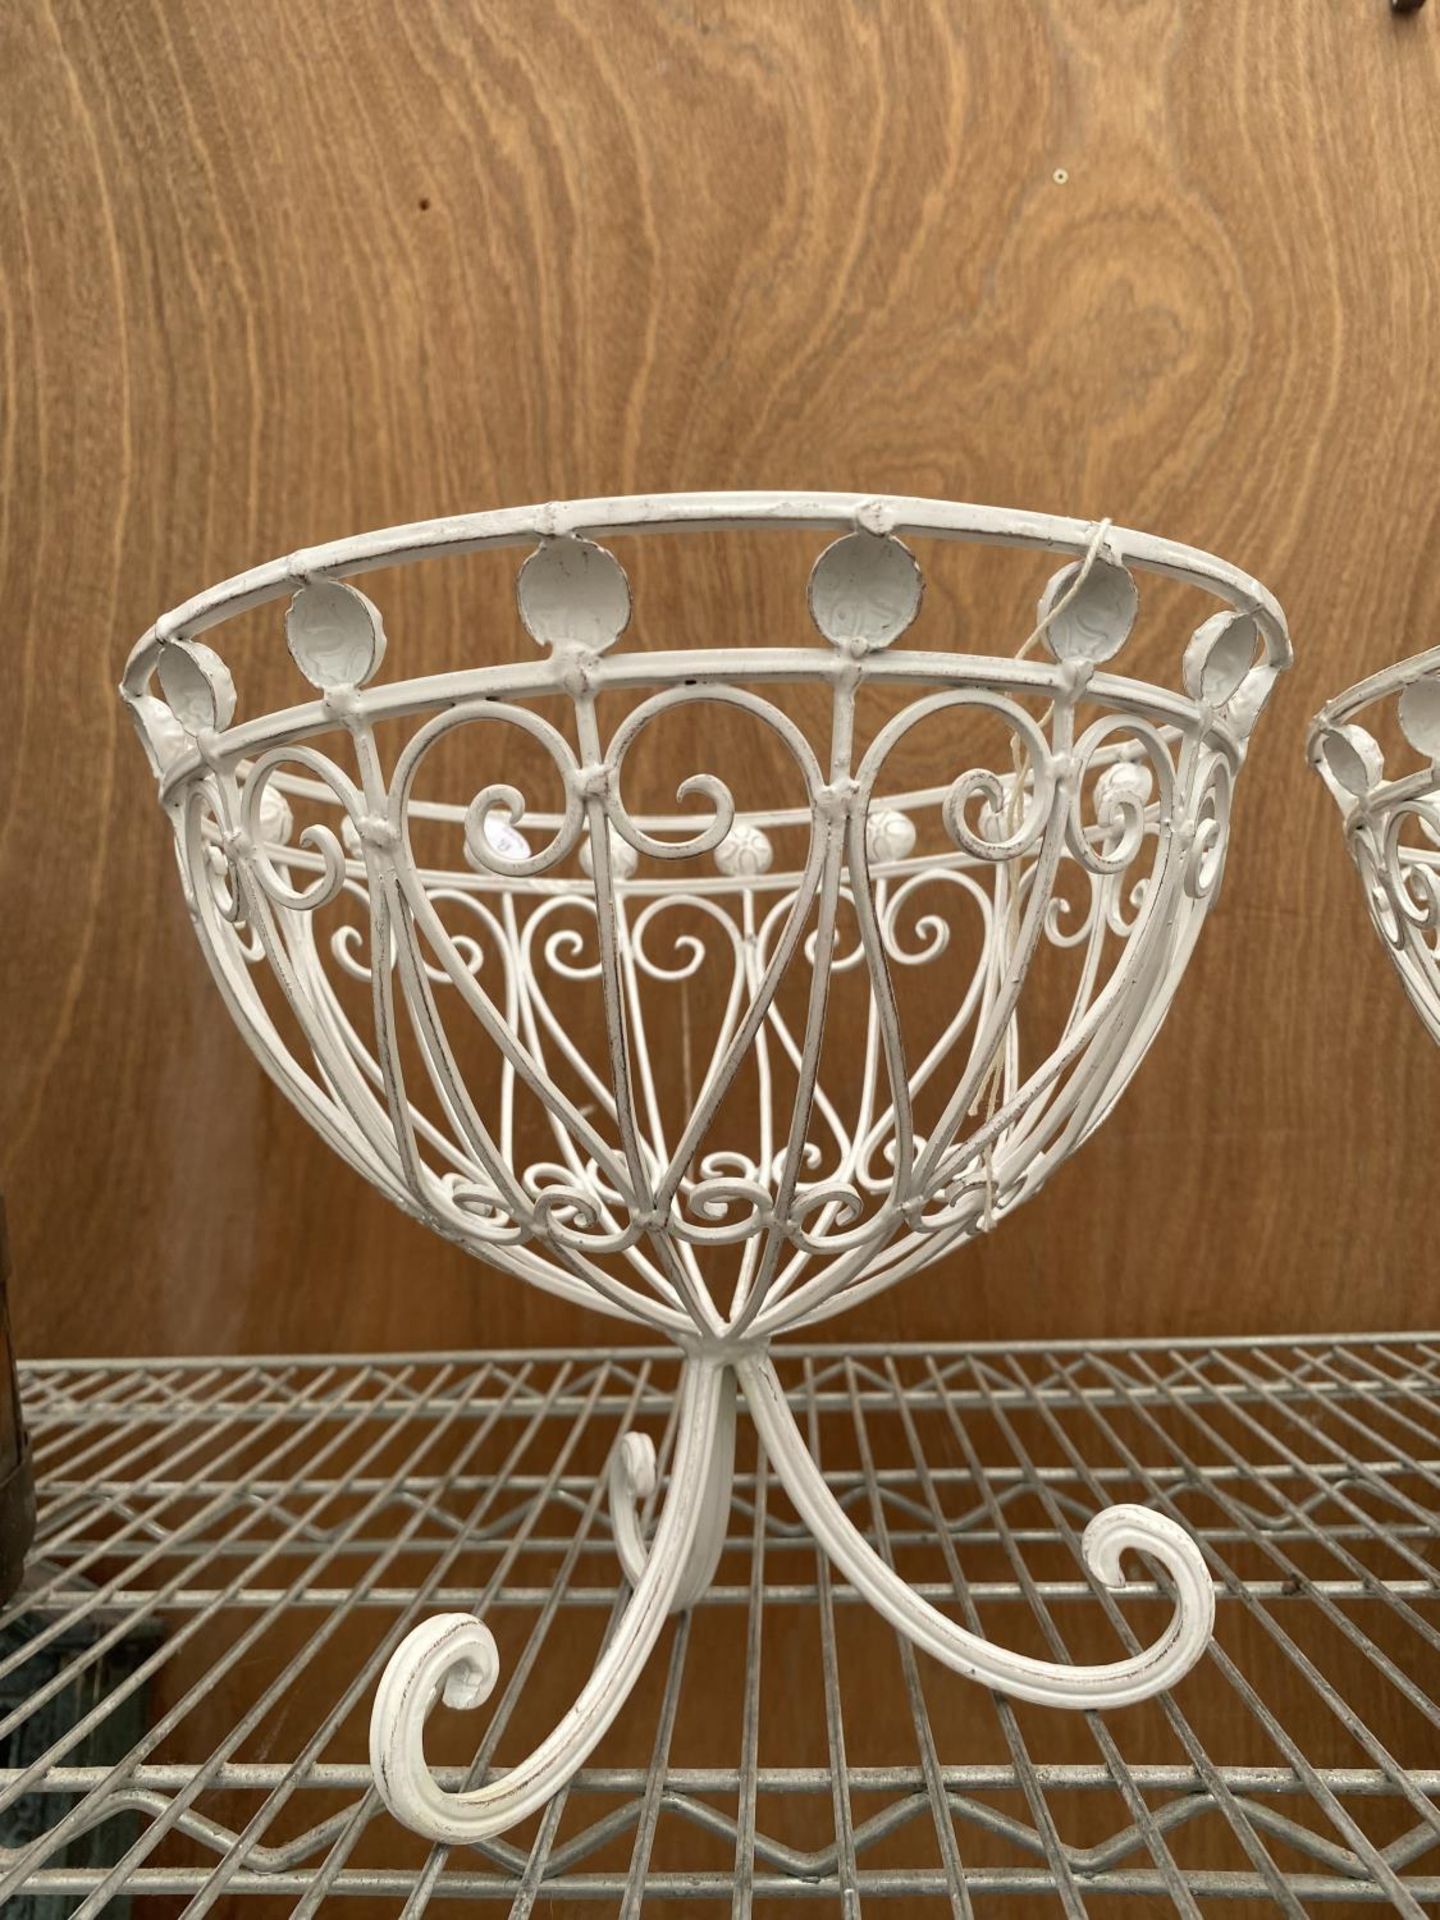 A PAIR OF DECORATIVE METAL PLANTERS - Image 2 of 3